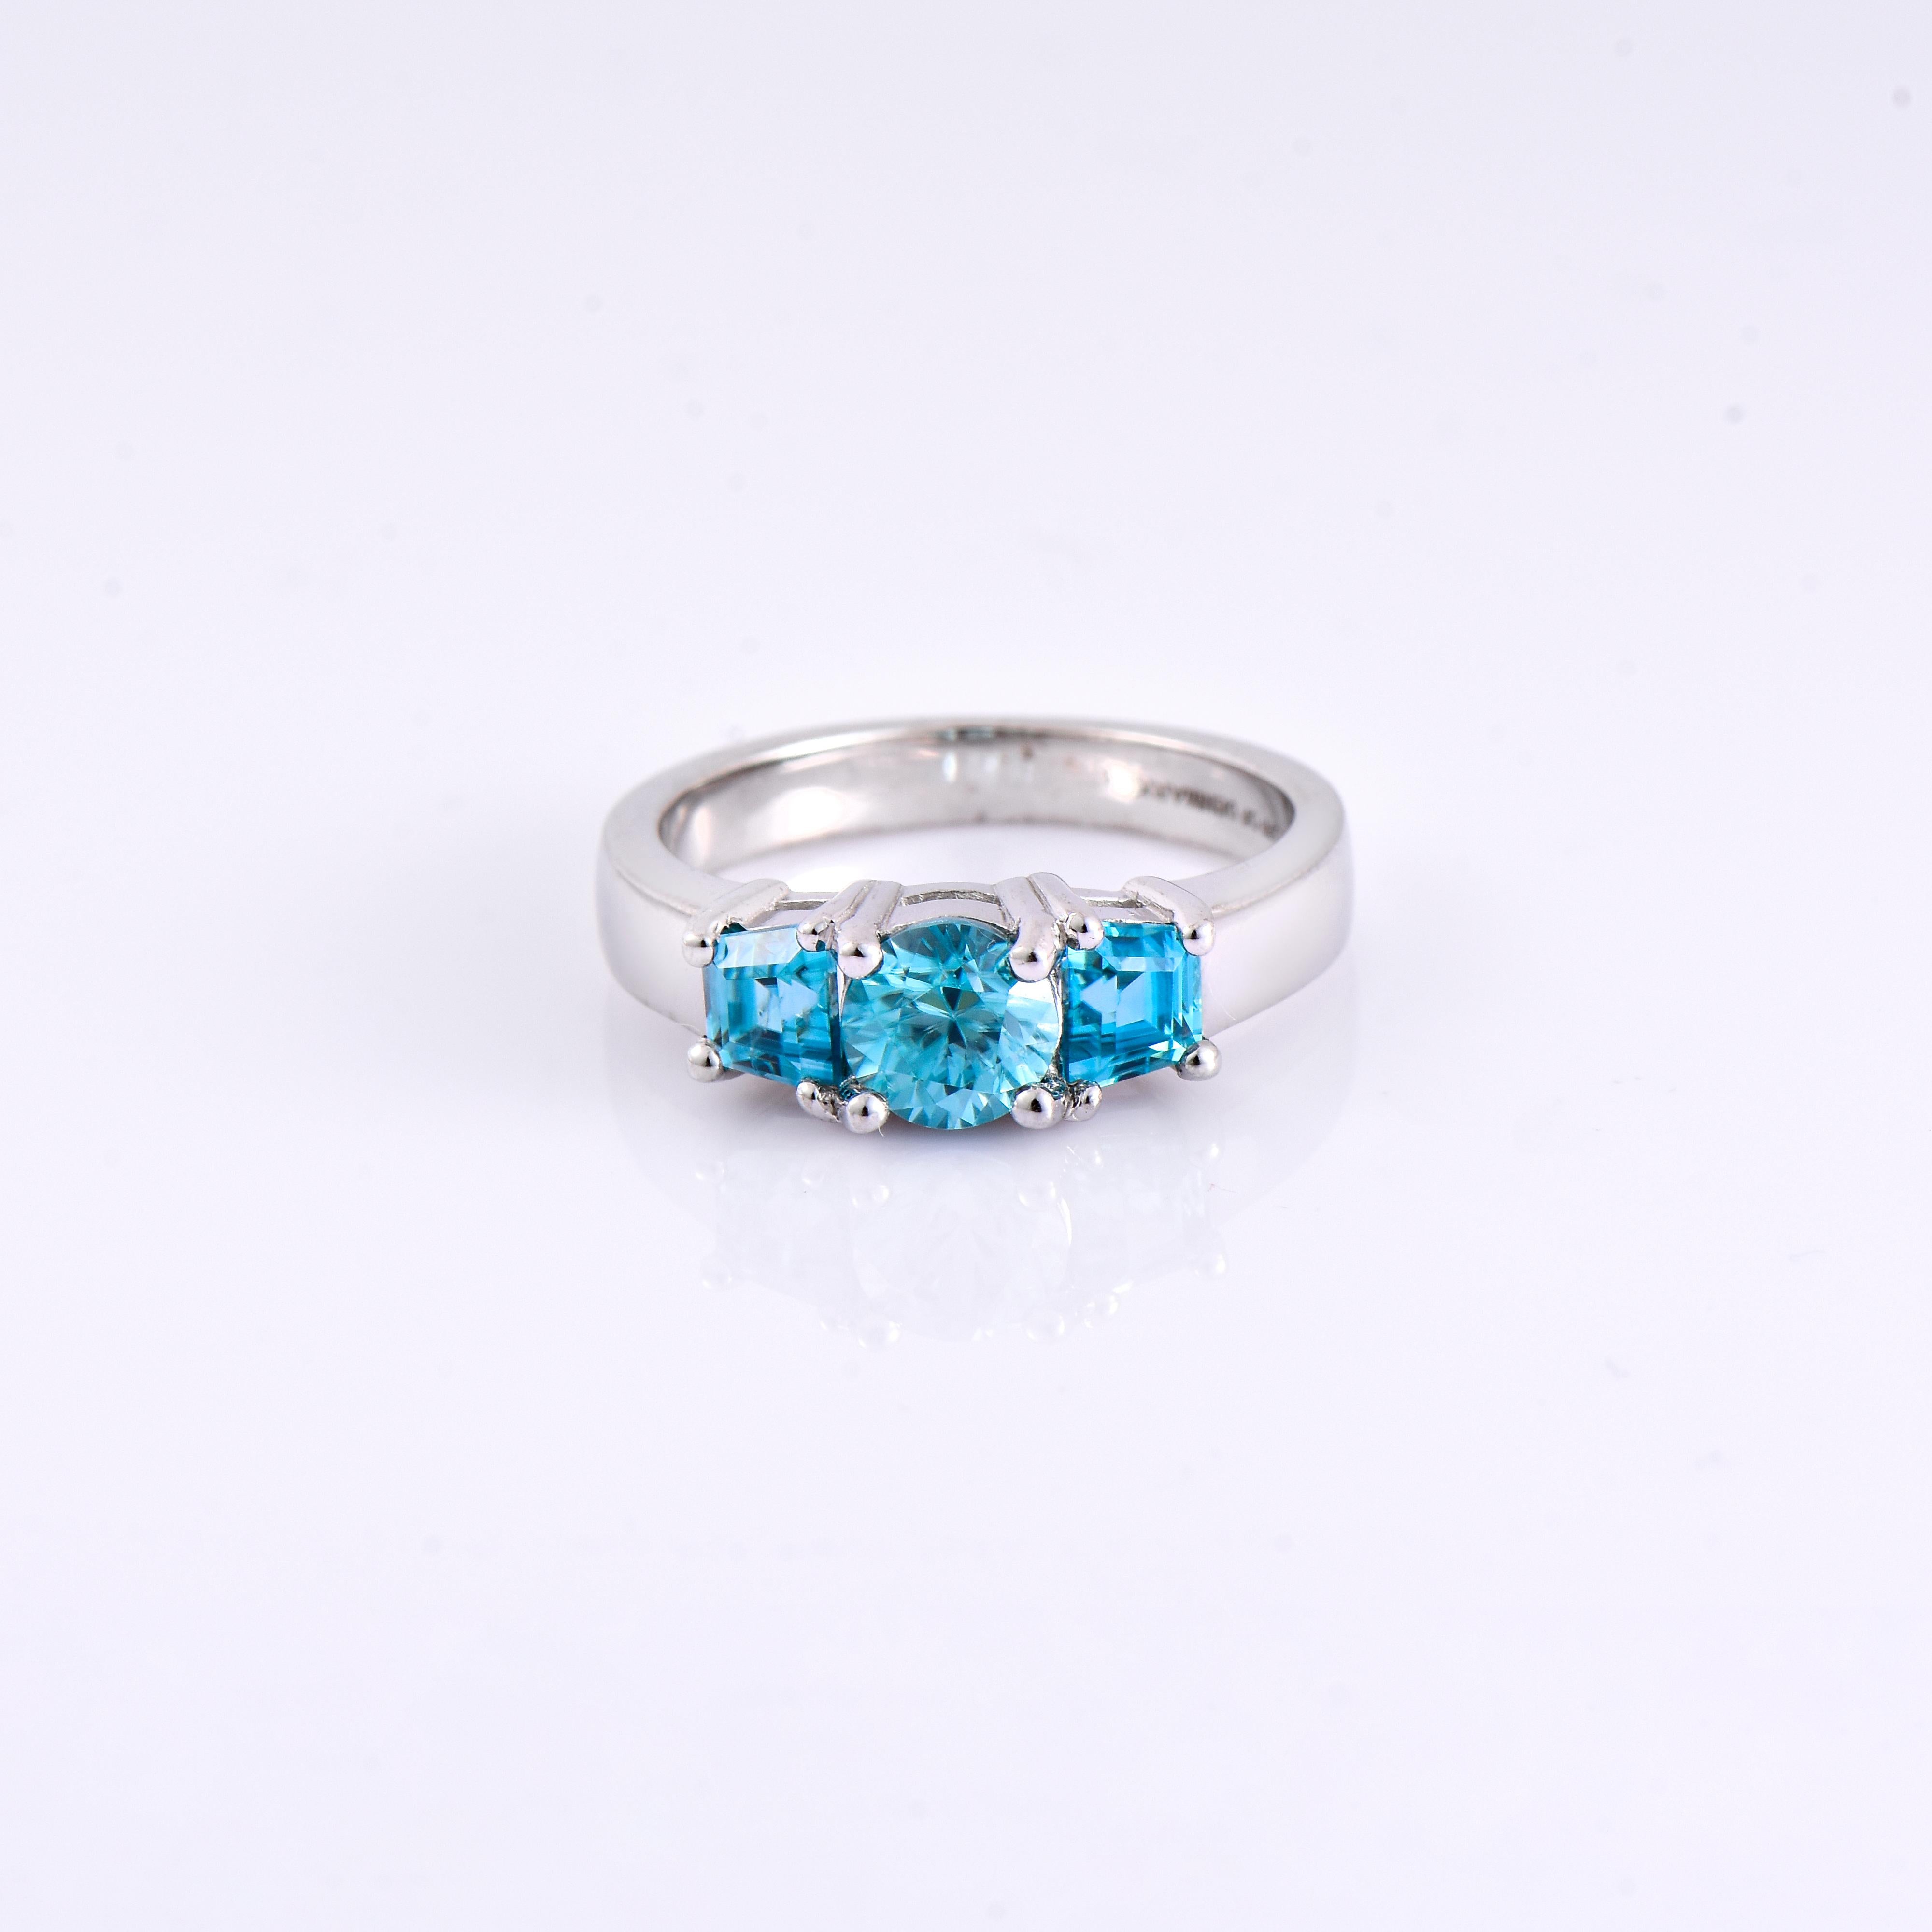 Orloff of Denmark; 925 Sterling Silver Ring set with three Natural Cambodian Blue Zircons totaling to 2.65 carats.

This piece has been meticulously hand-crafted out of 925 sterling silver.
In the center sits a fantastic 1.32 carat blue zircon